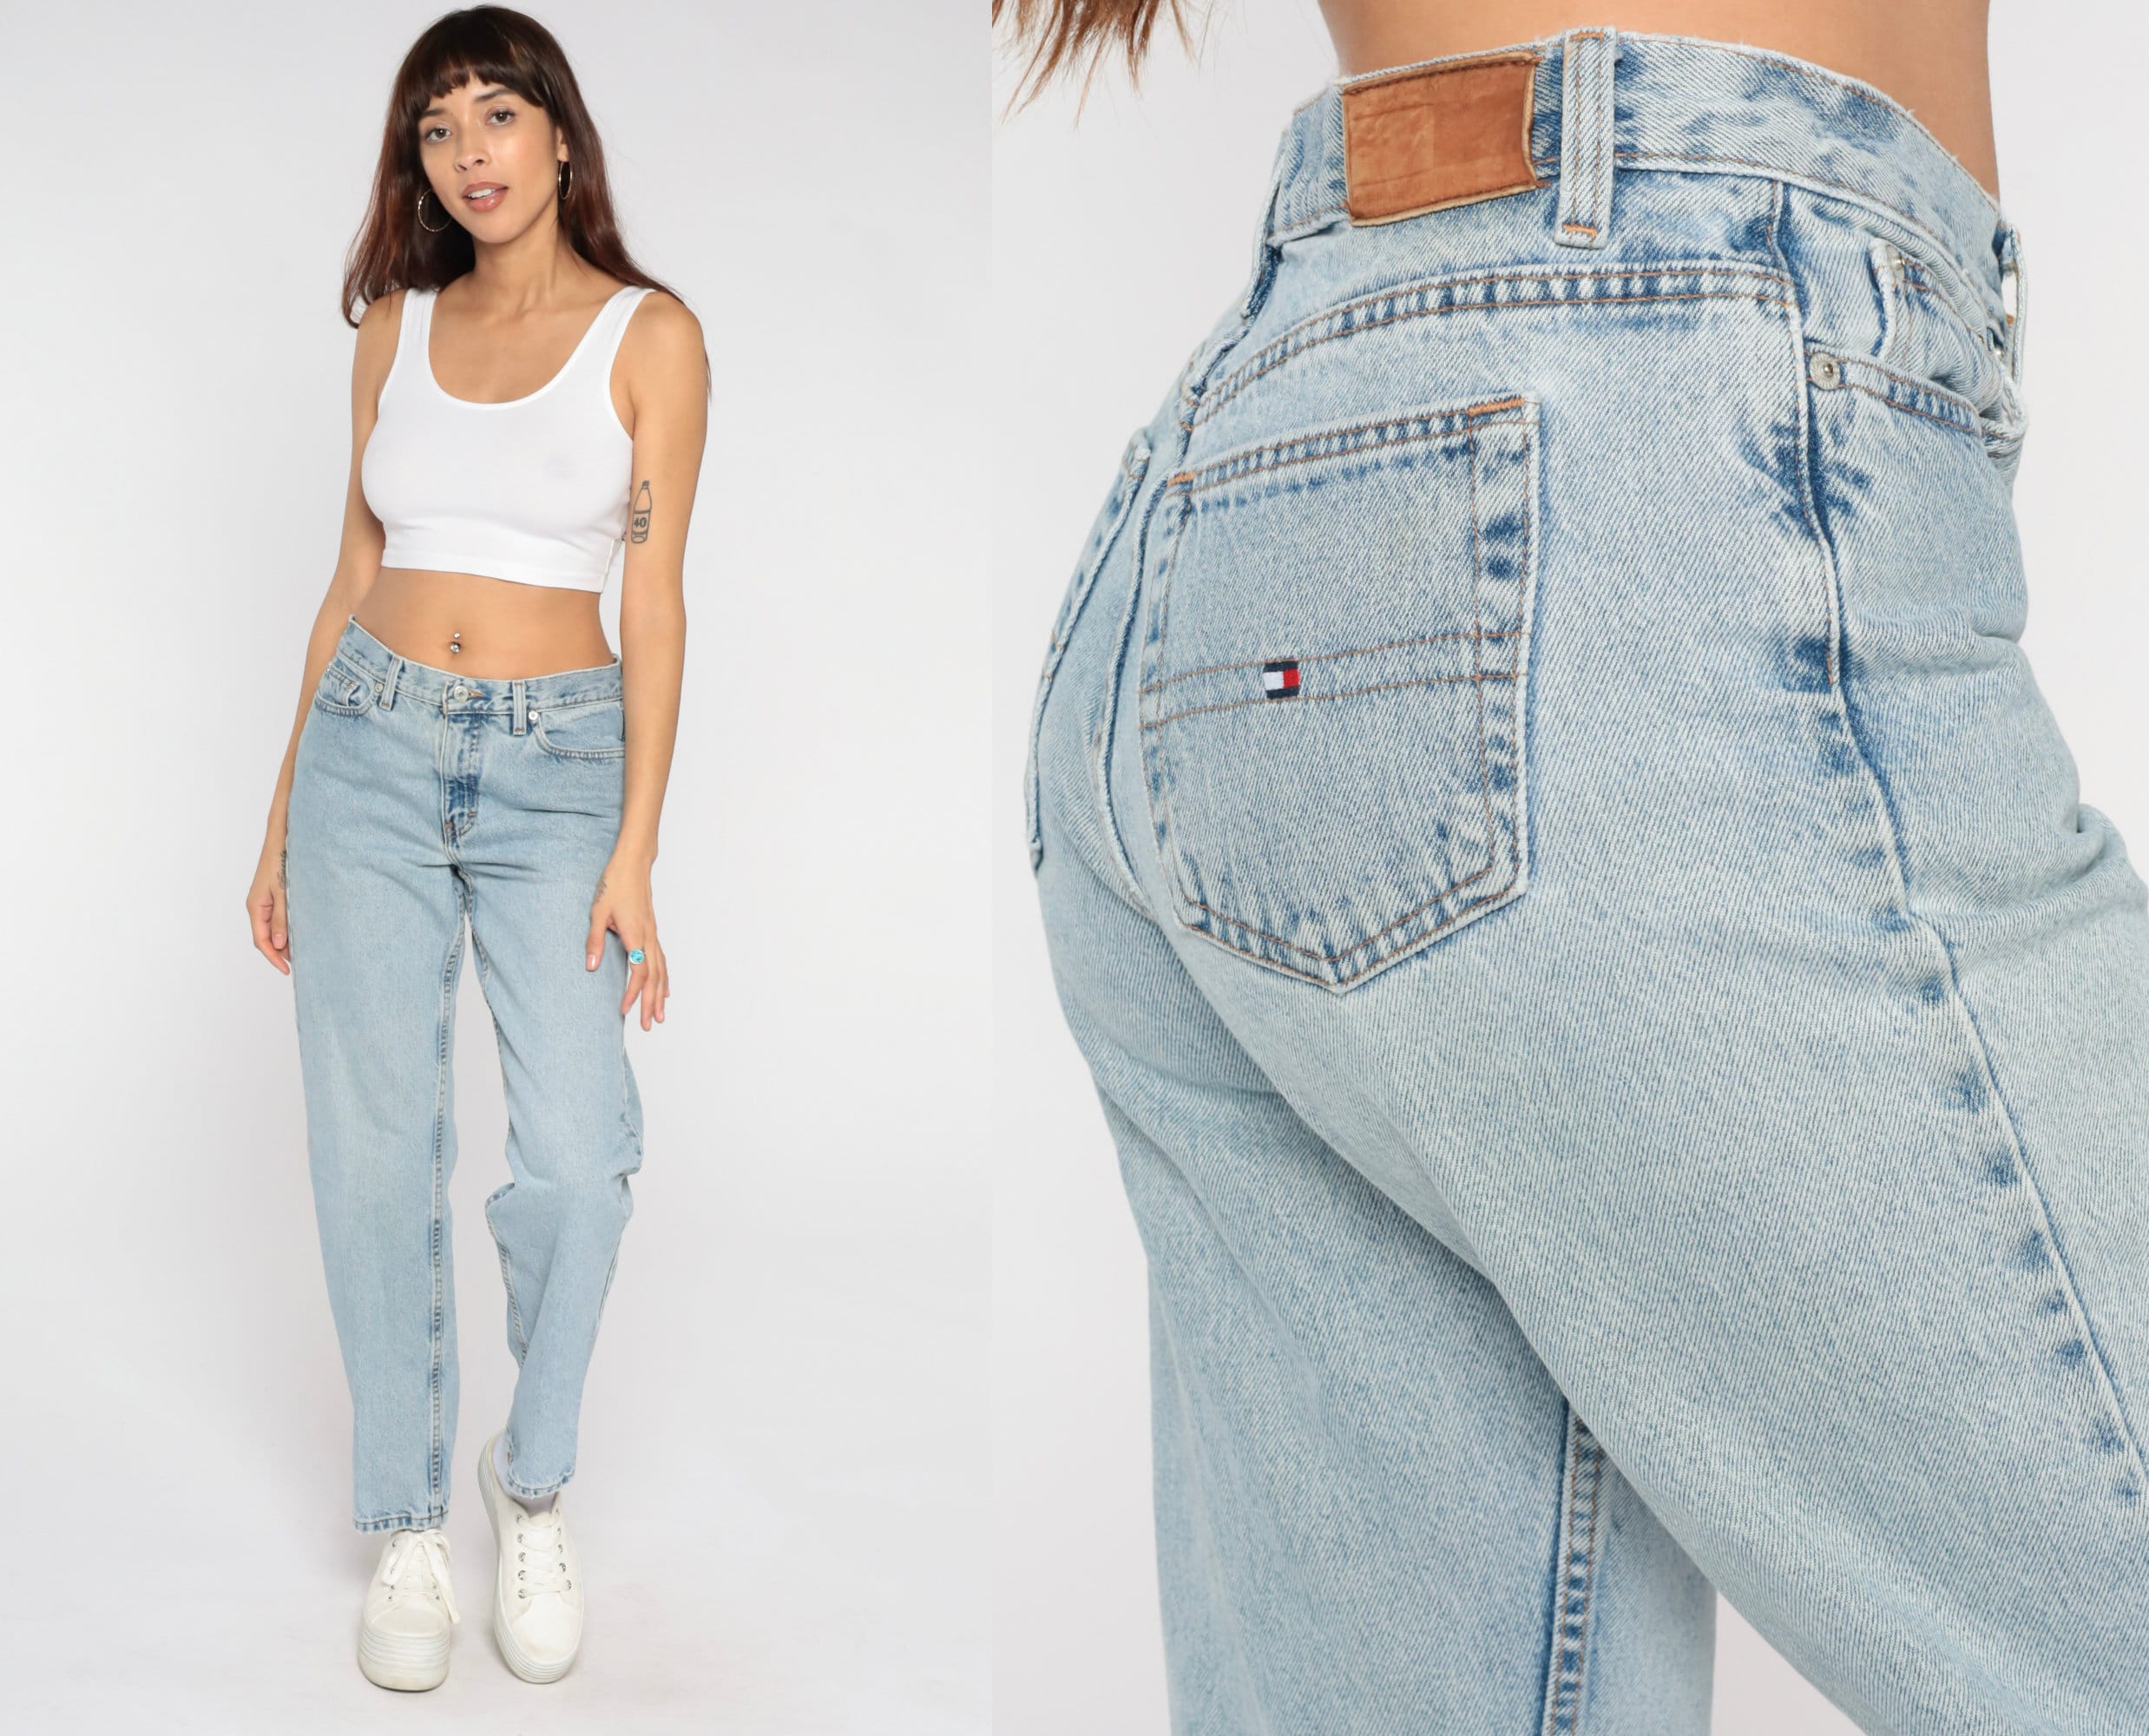 Tommy Hilfiger Jeans Y2K Mid Rise Jeans Retro Straight Leg 